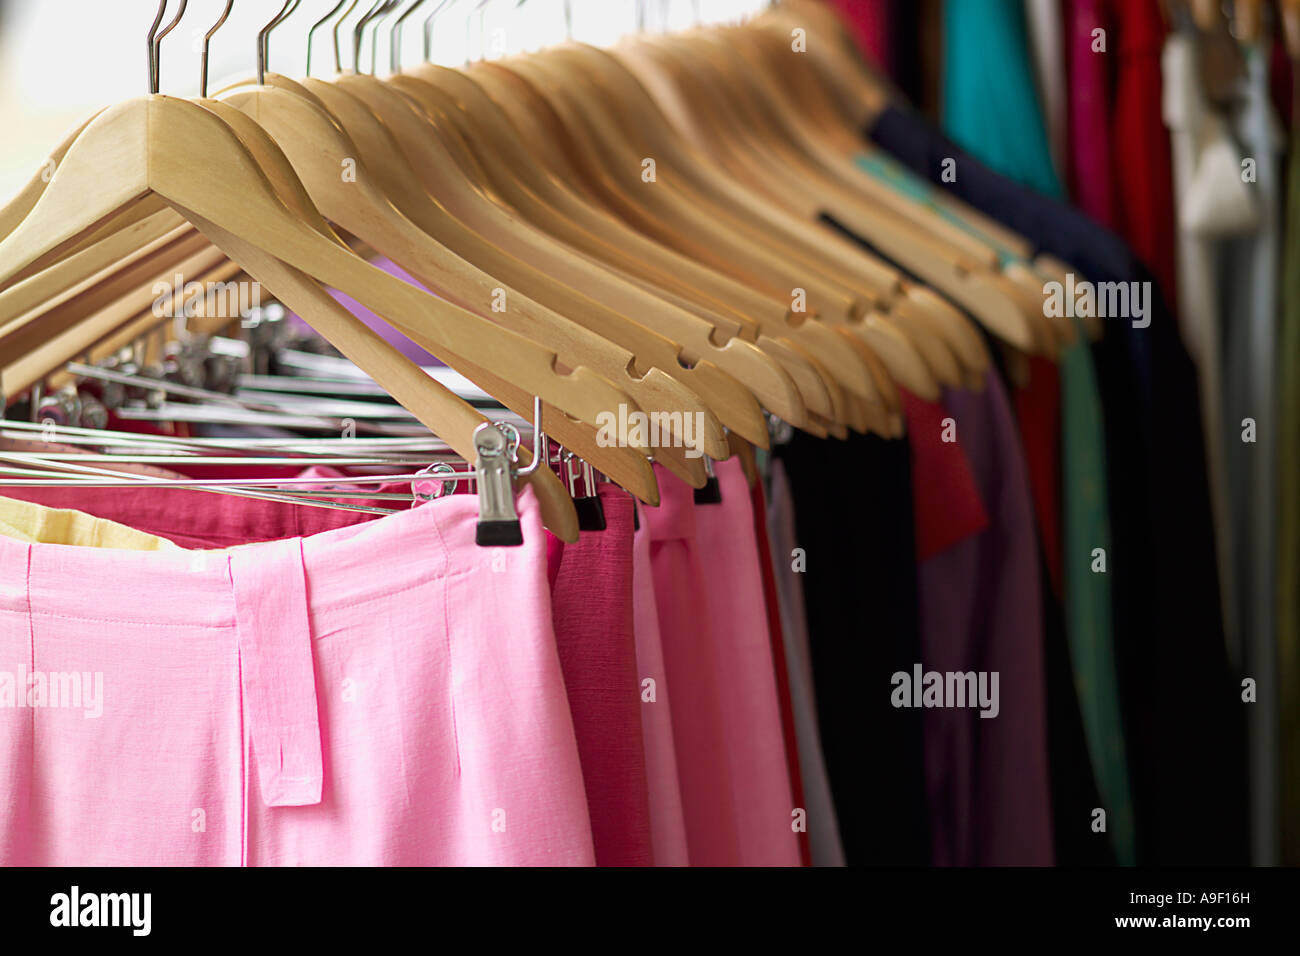 ROW OF CLOTHES HANGERS WITH PINK SKIRTS Stock Photo